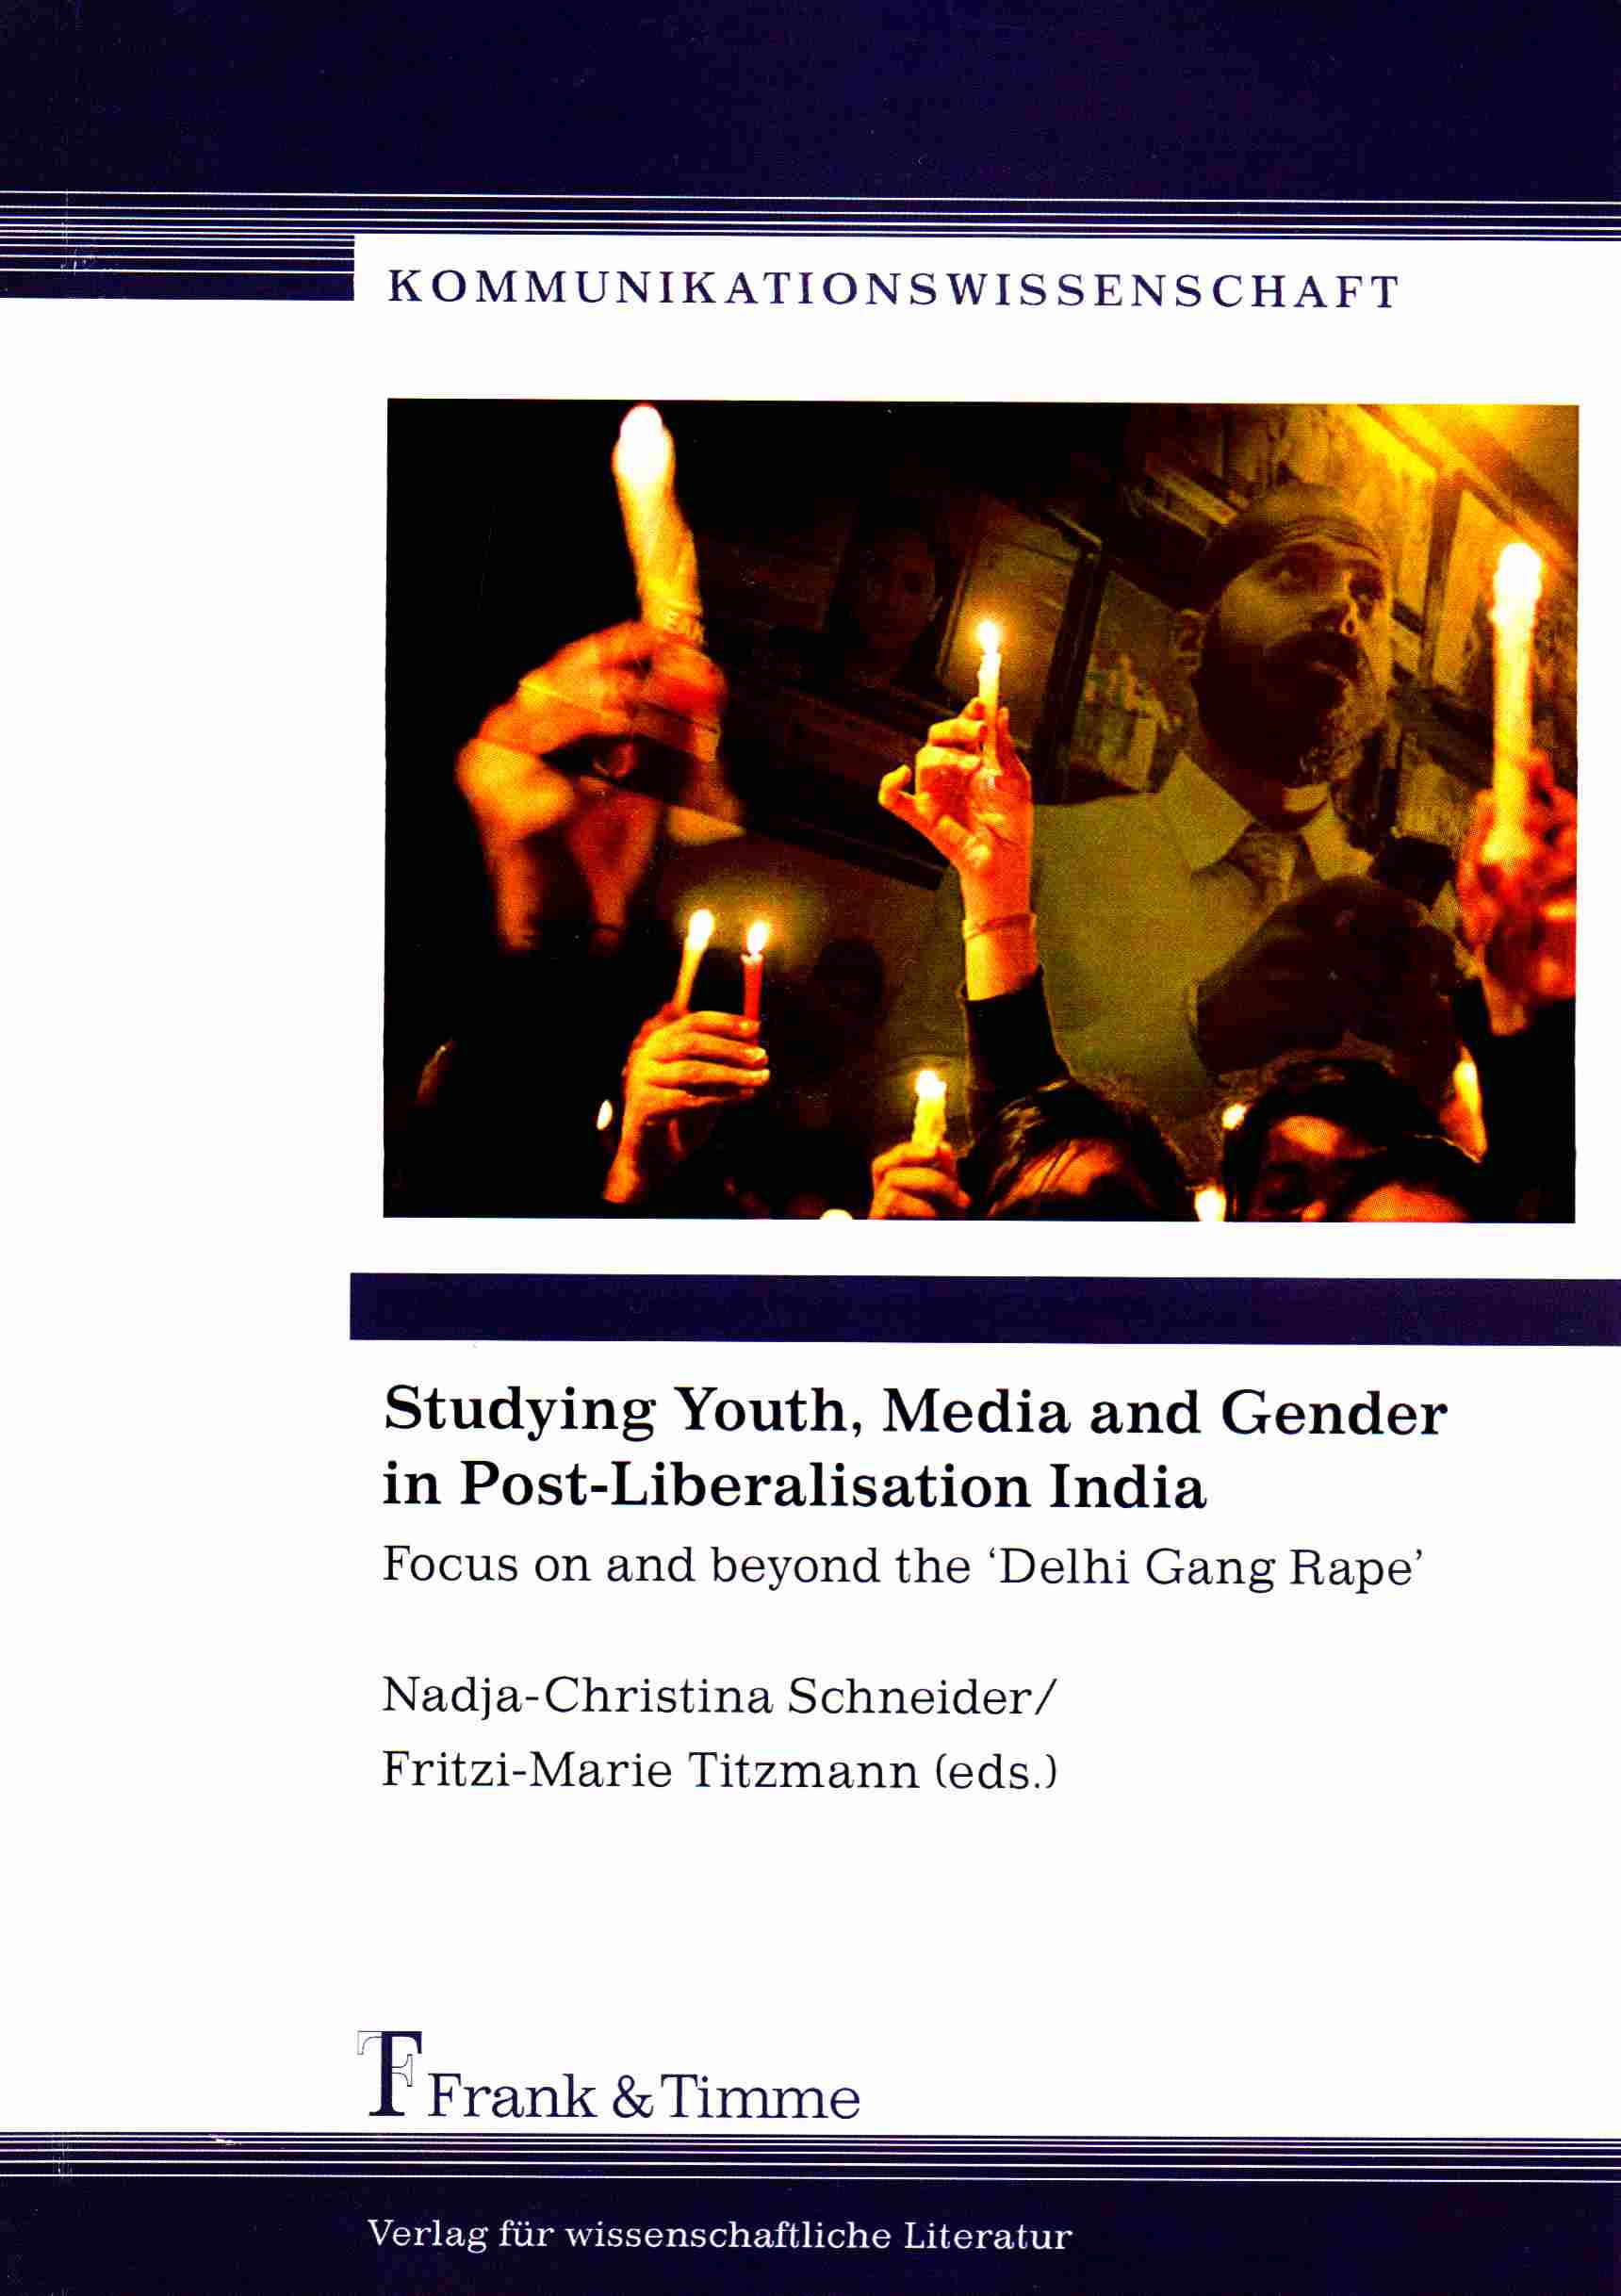 SCHNEIDER&TITZMANN_Studying Youth, Media and Gender in Post-Liberalization India